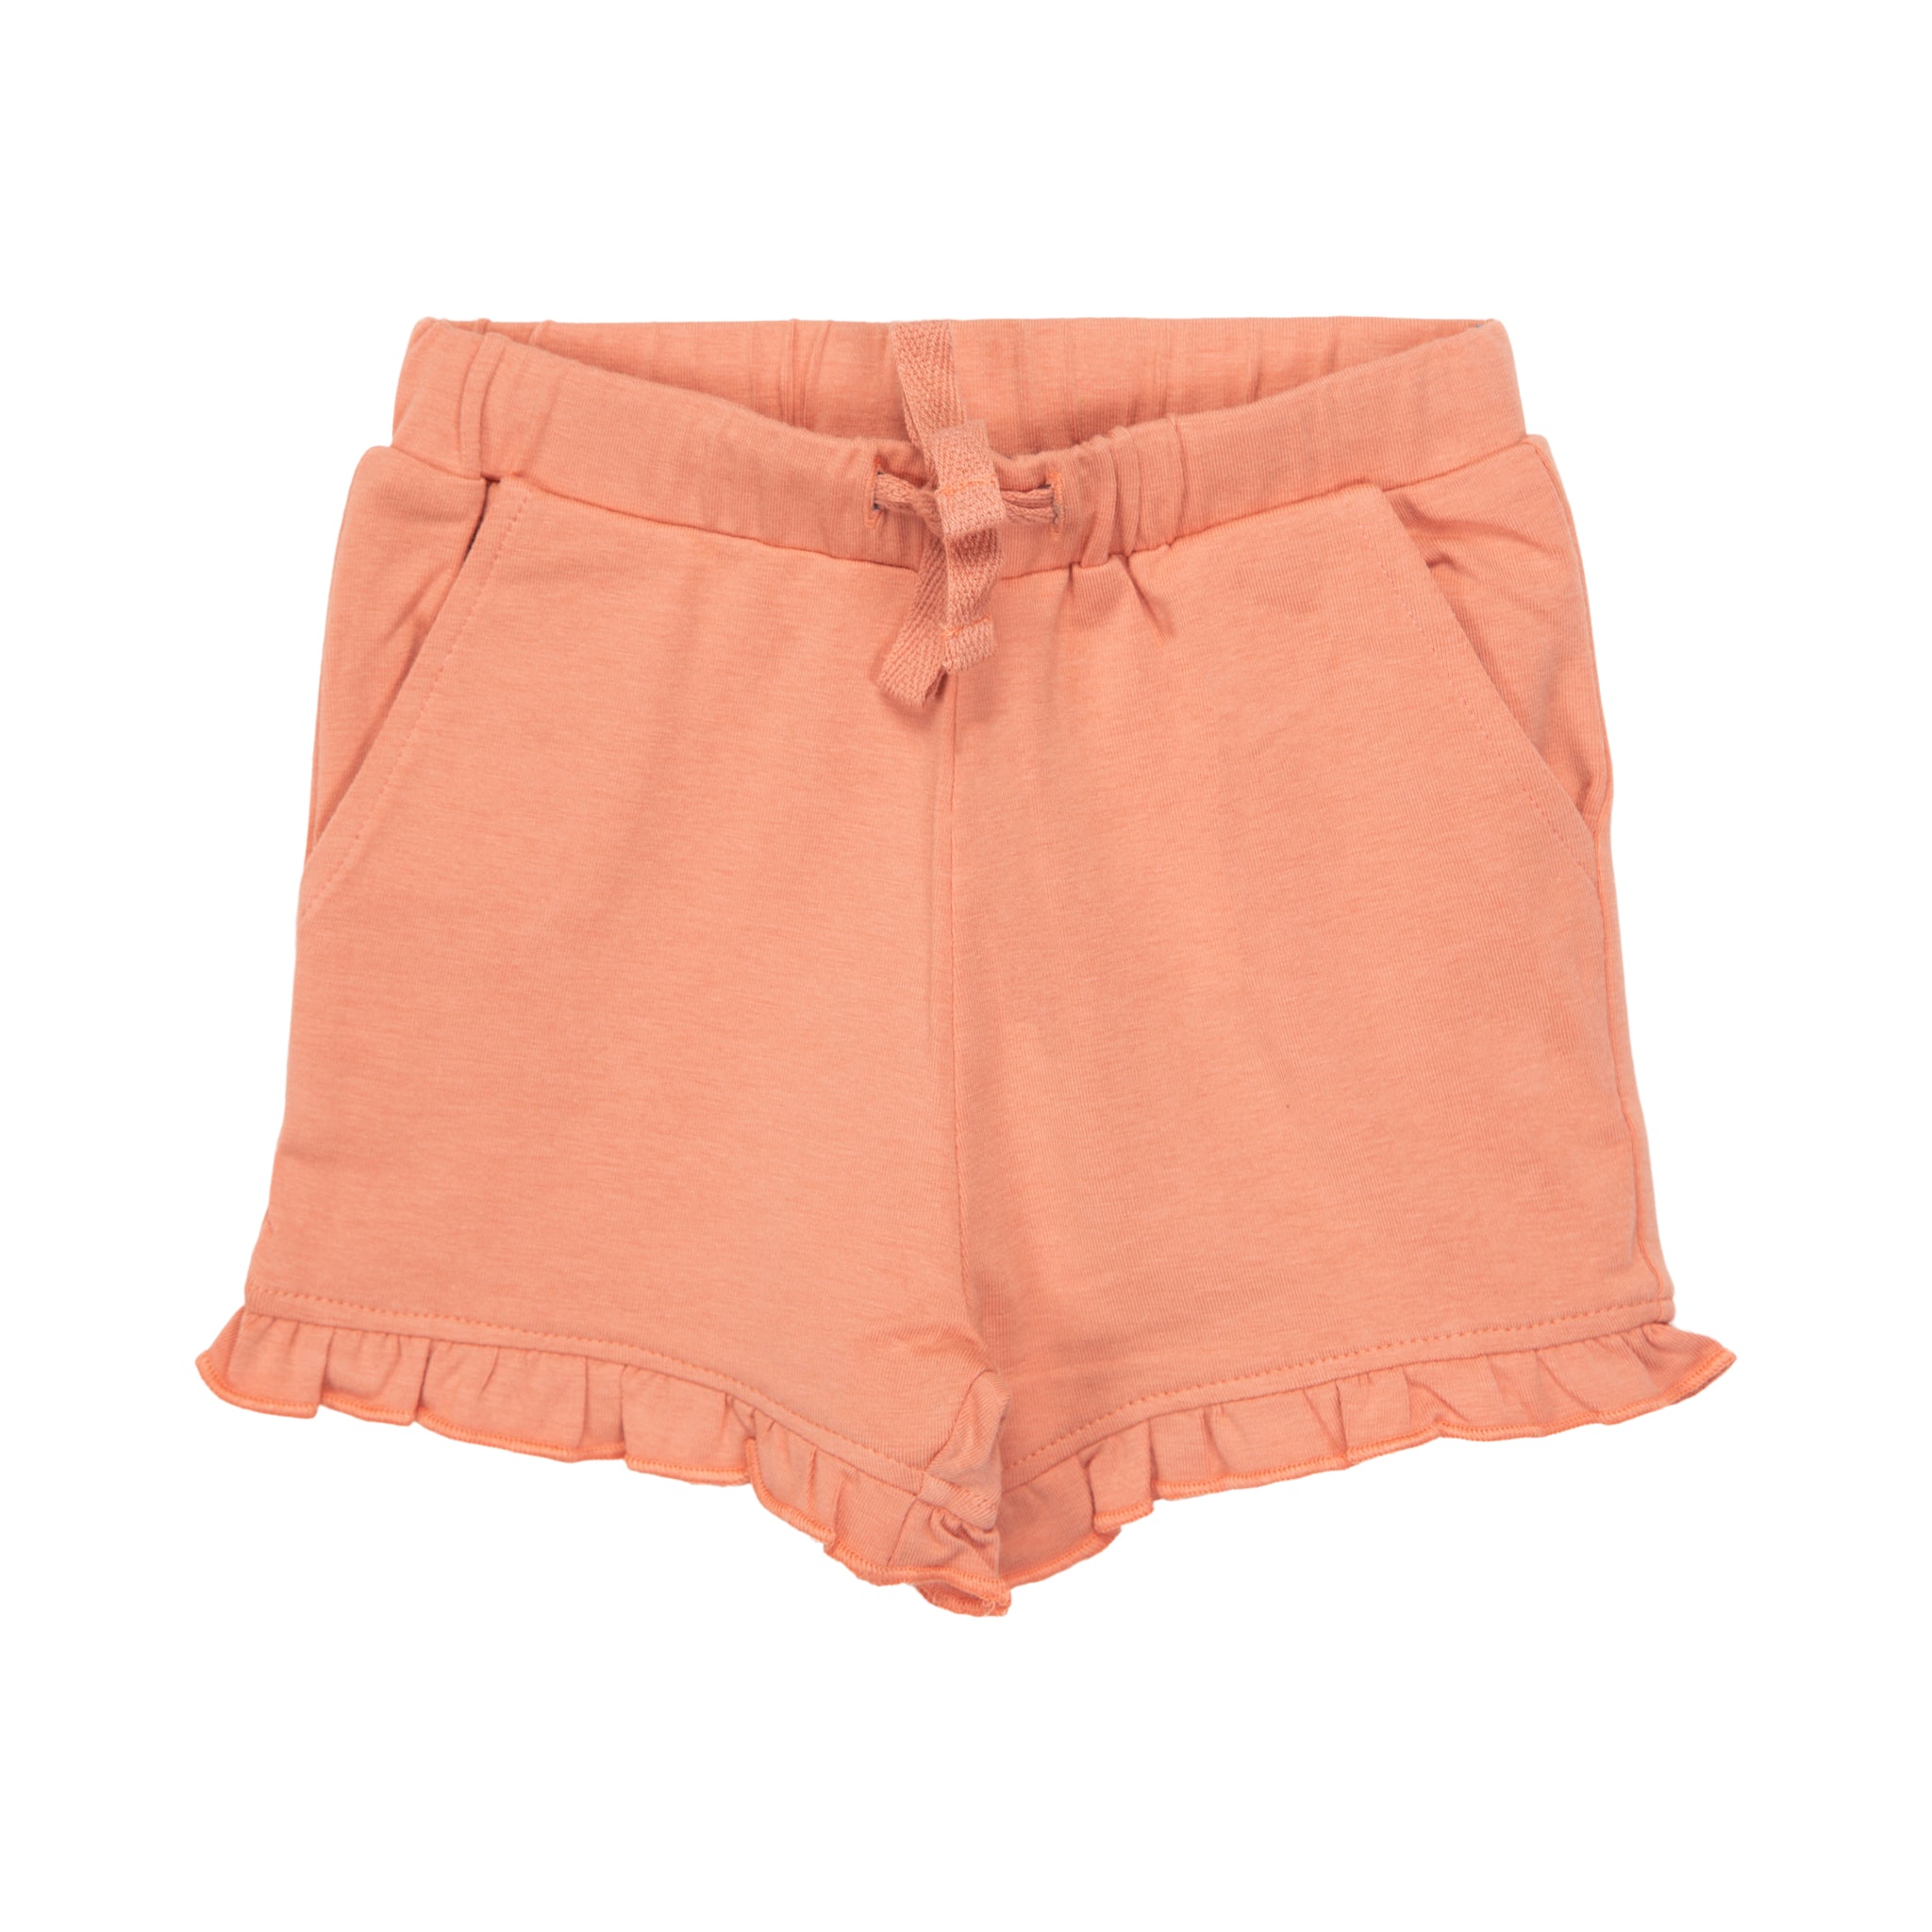 Petit by Sofie Schnoor - Shorts, Daphne - Dusty Rose